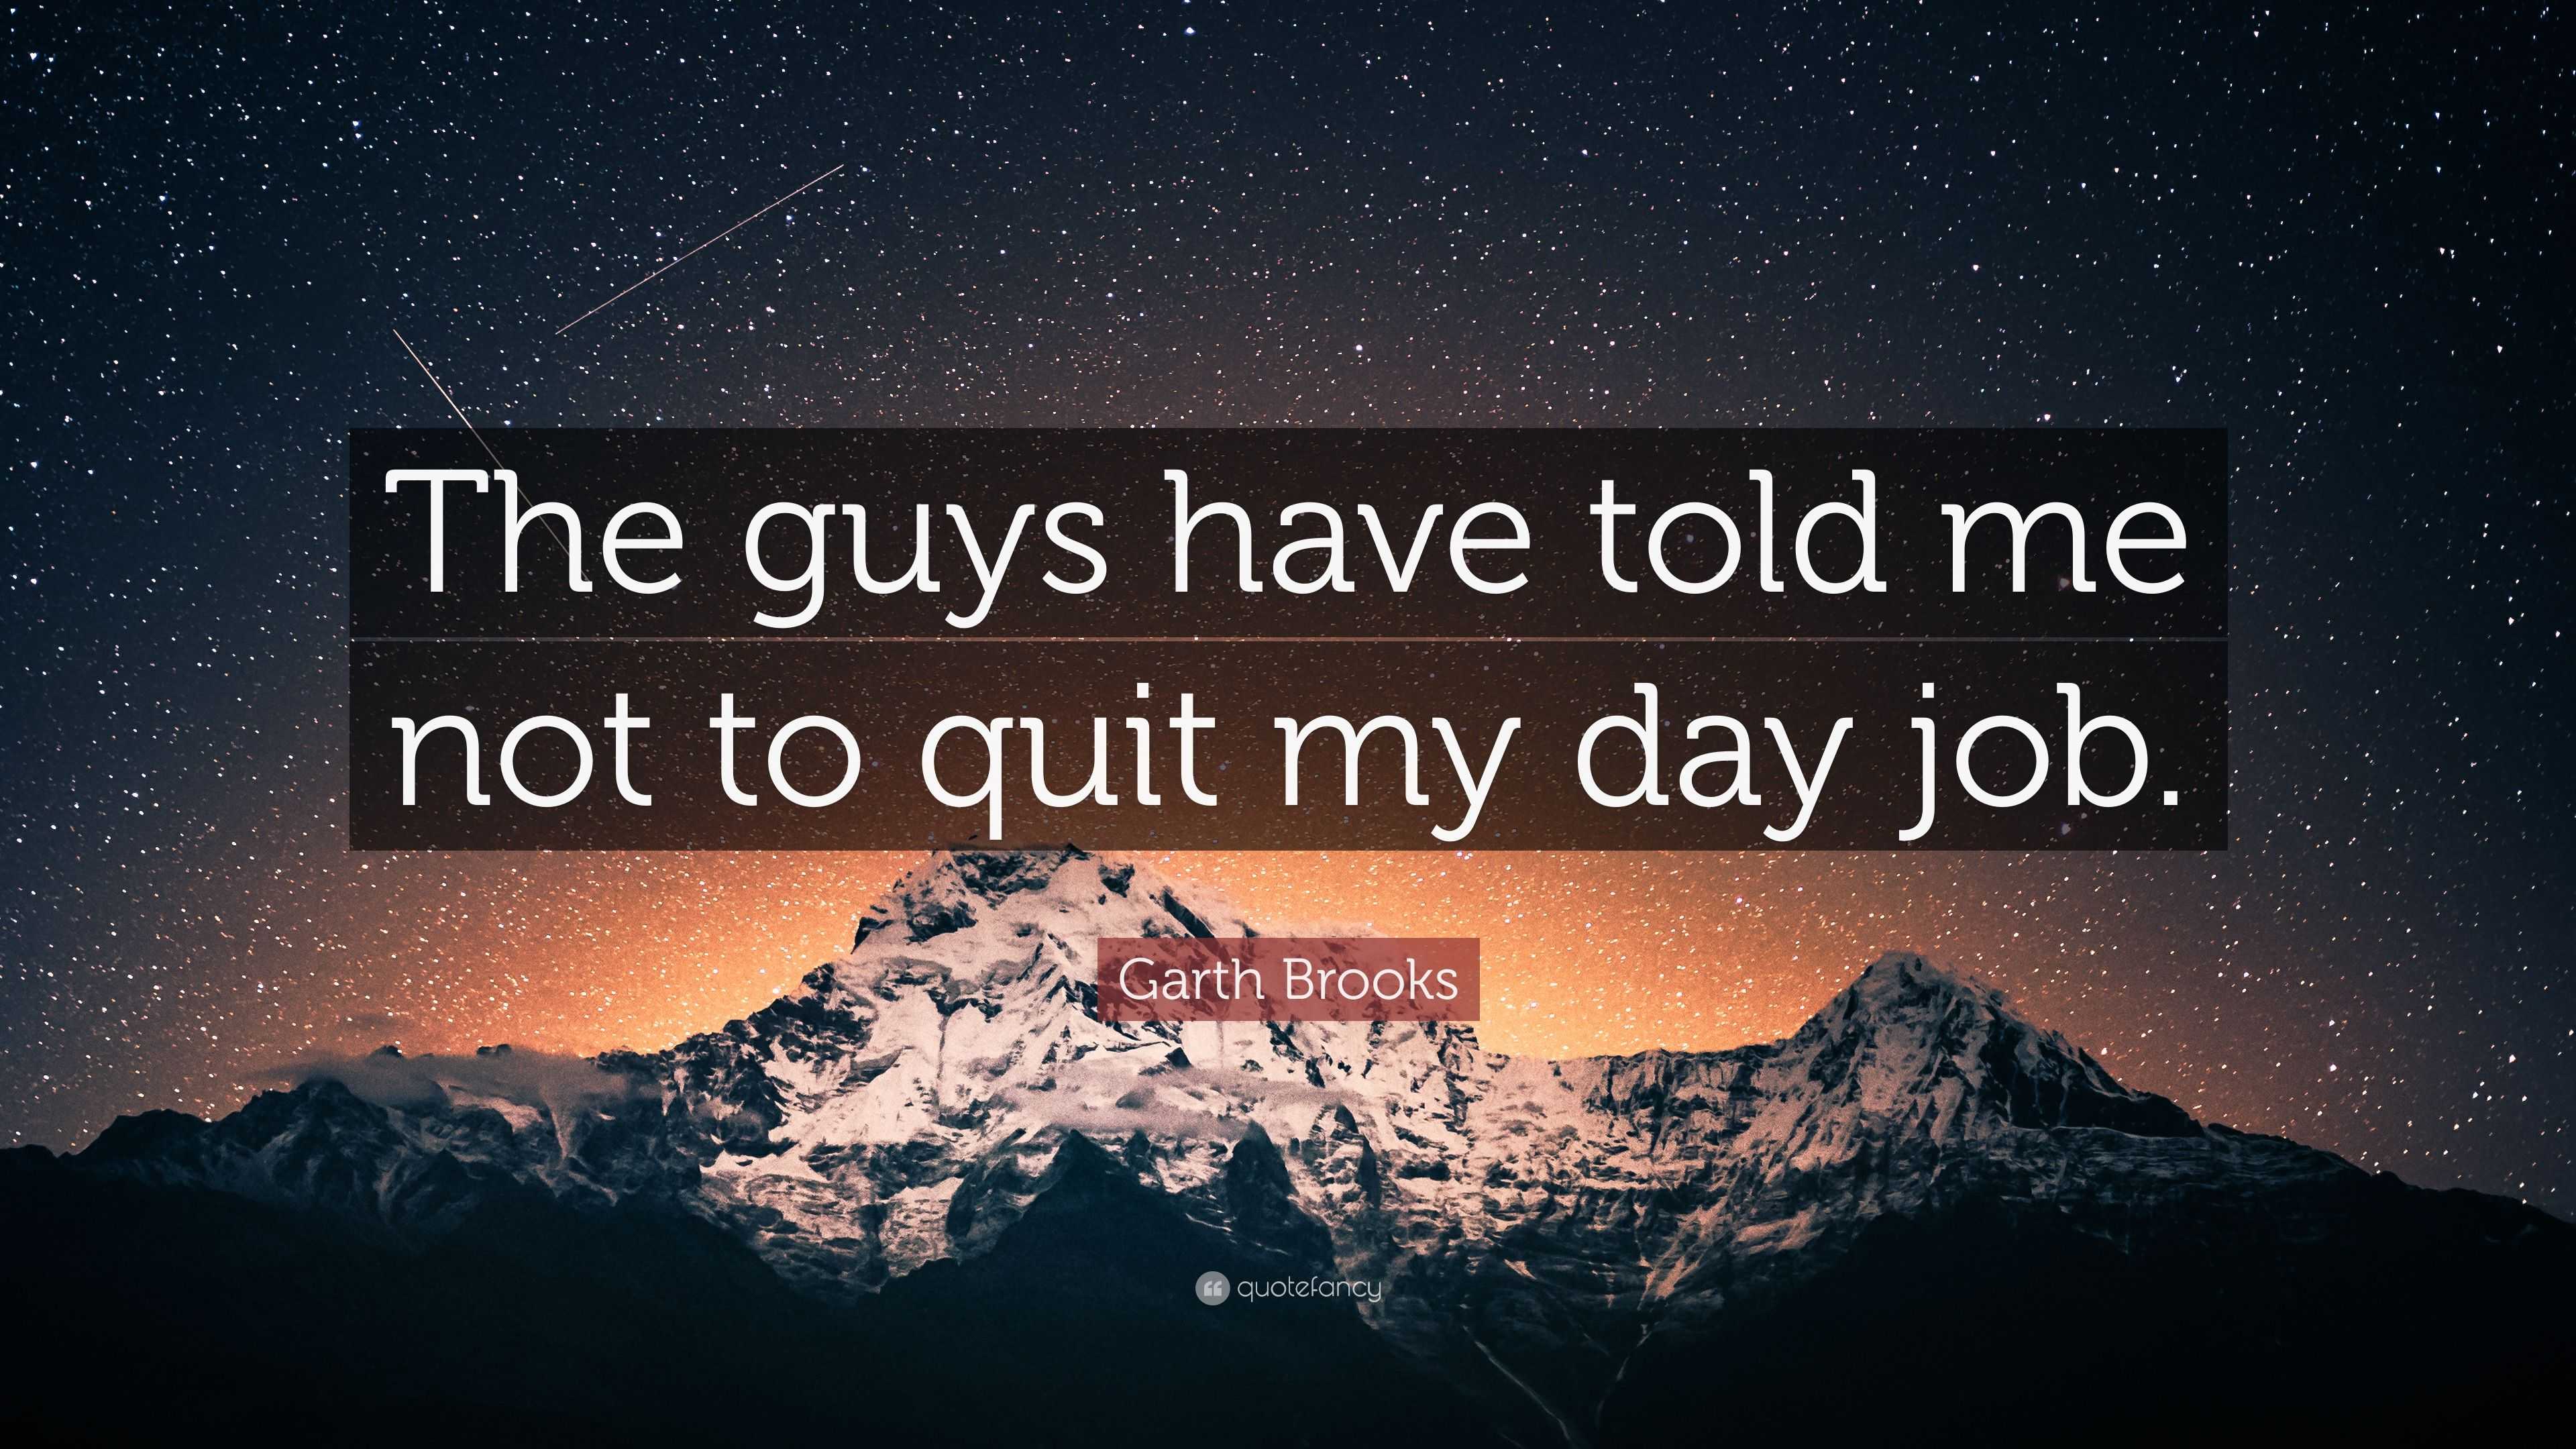 Garth Brooks Quote: “The guys have told me not to quit my day job.”